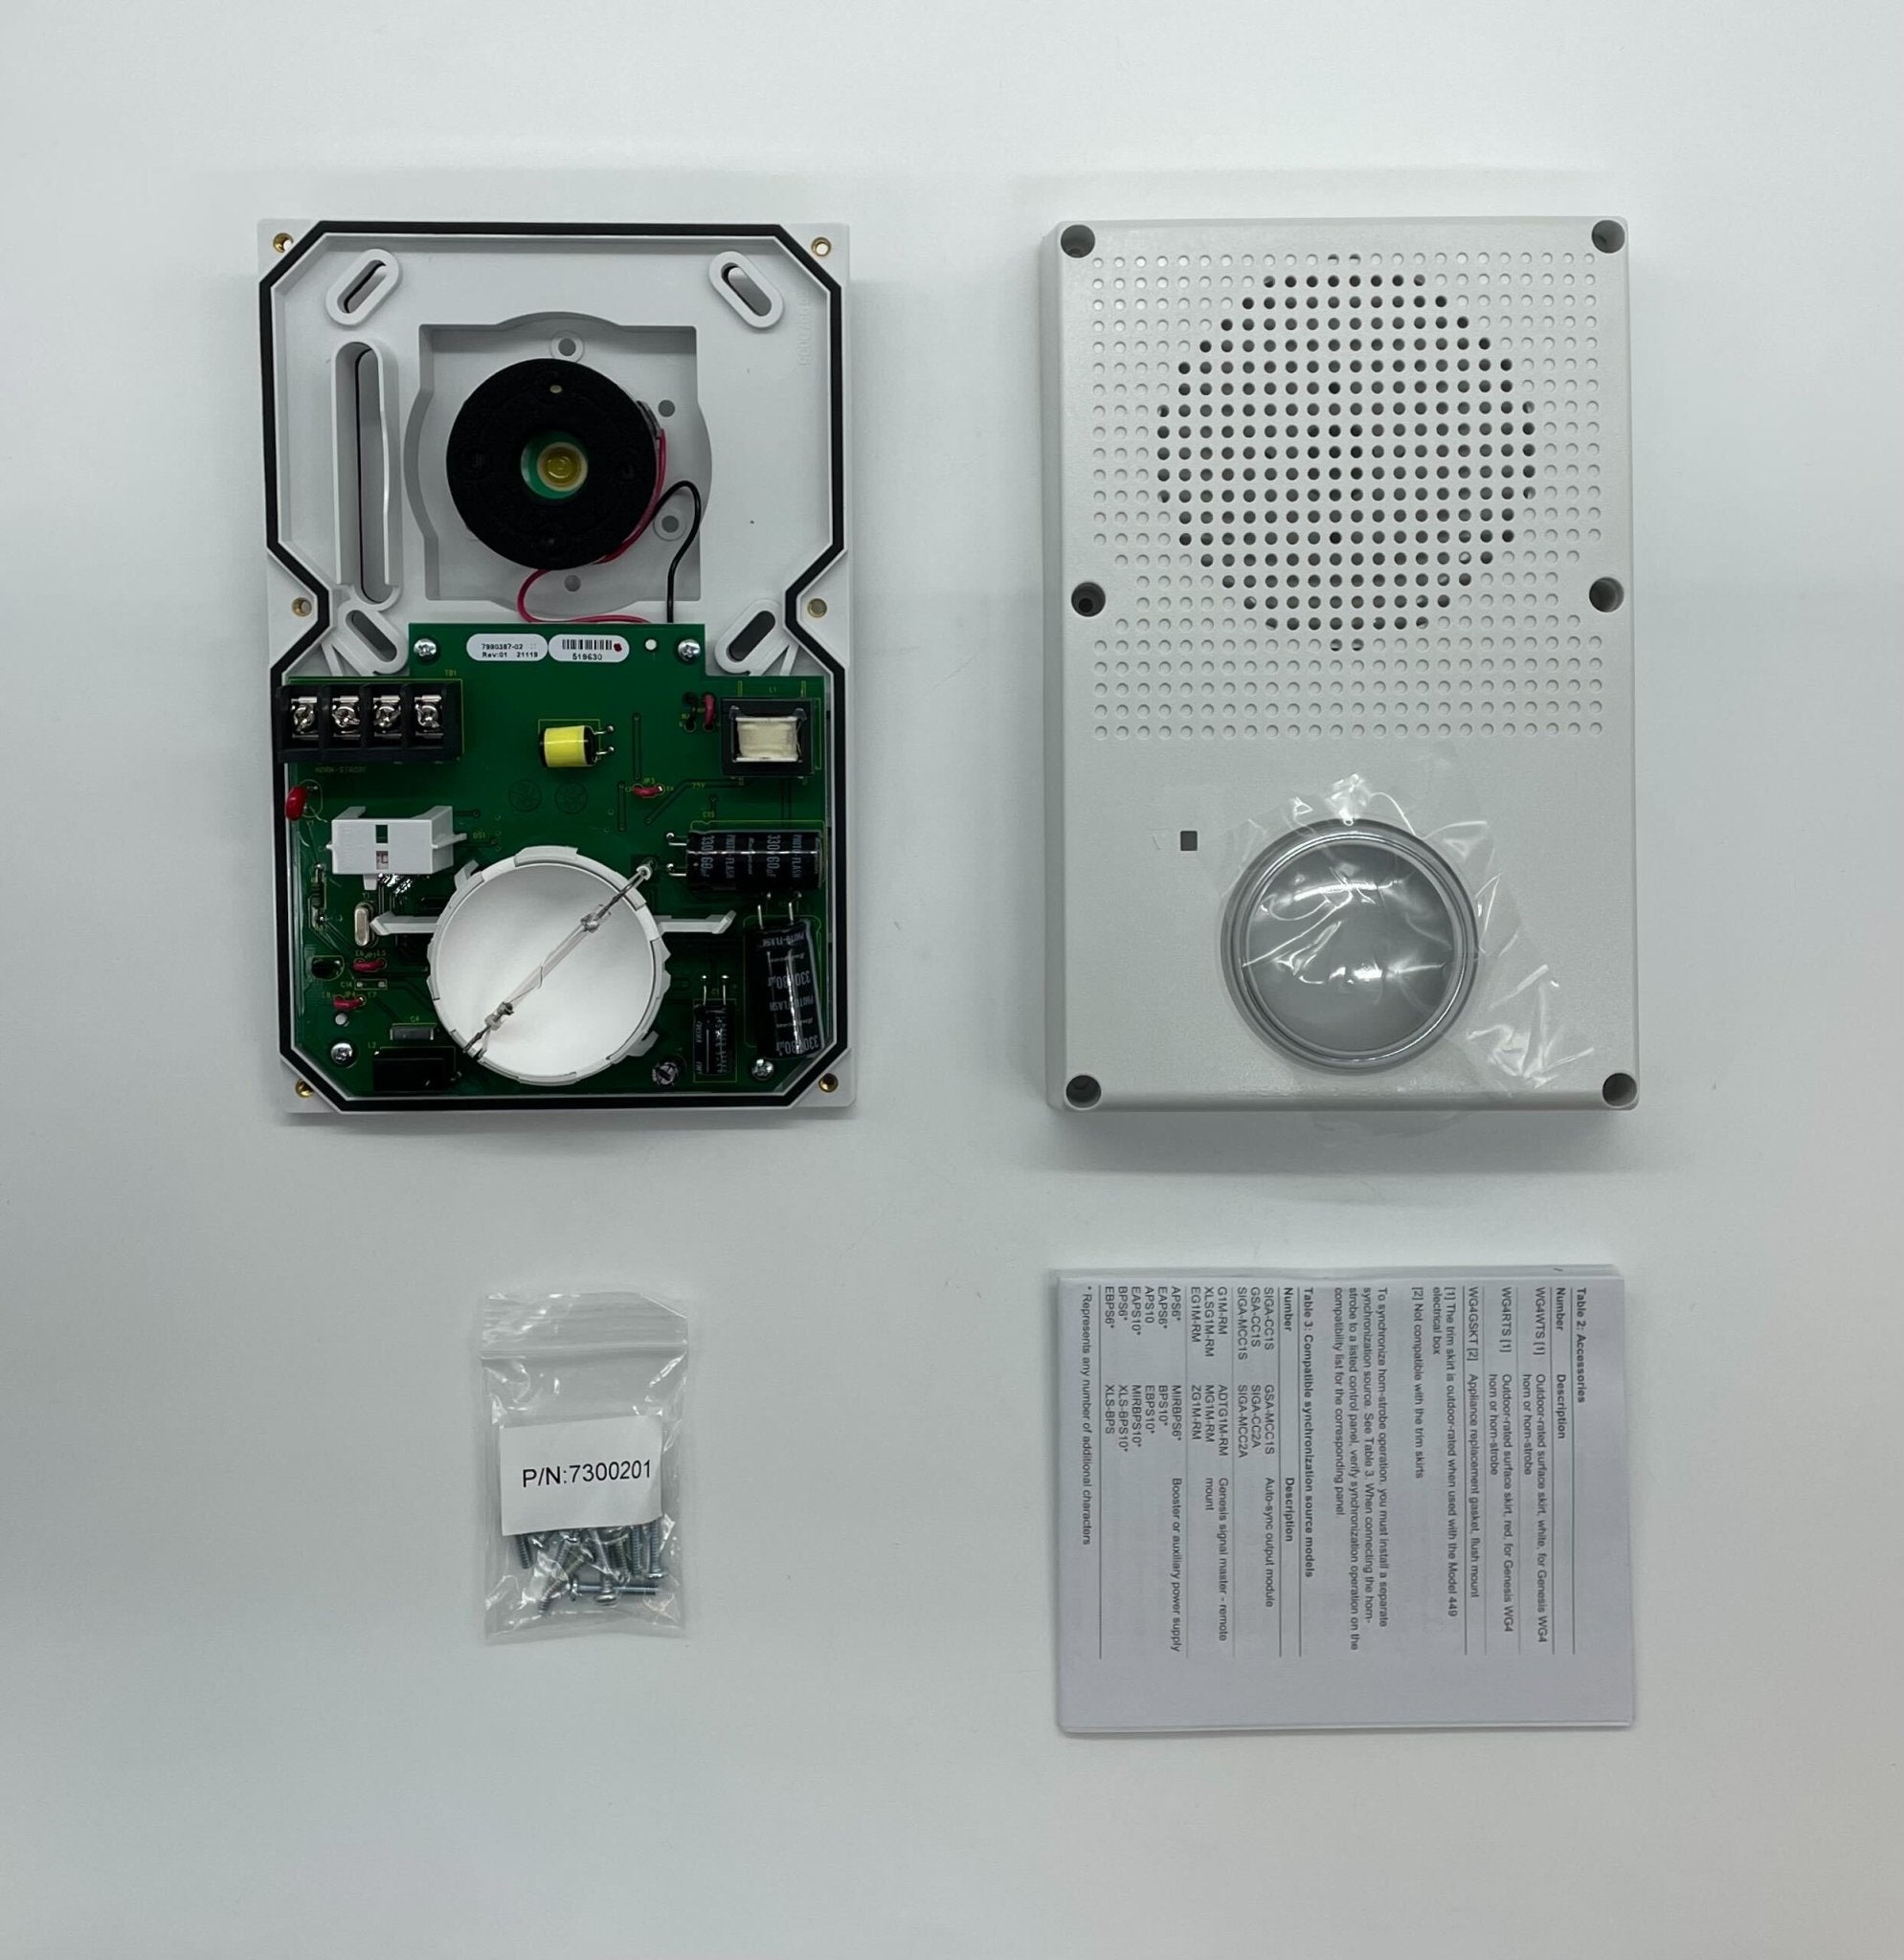 Edwards WG4WN-HVMHC - The Fire Alarm Supplier